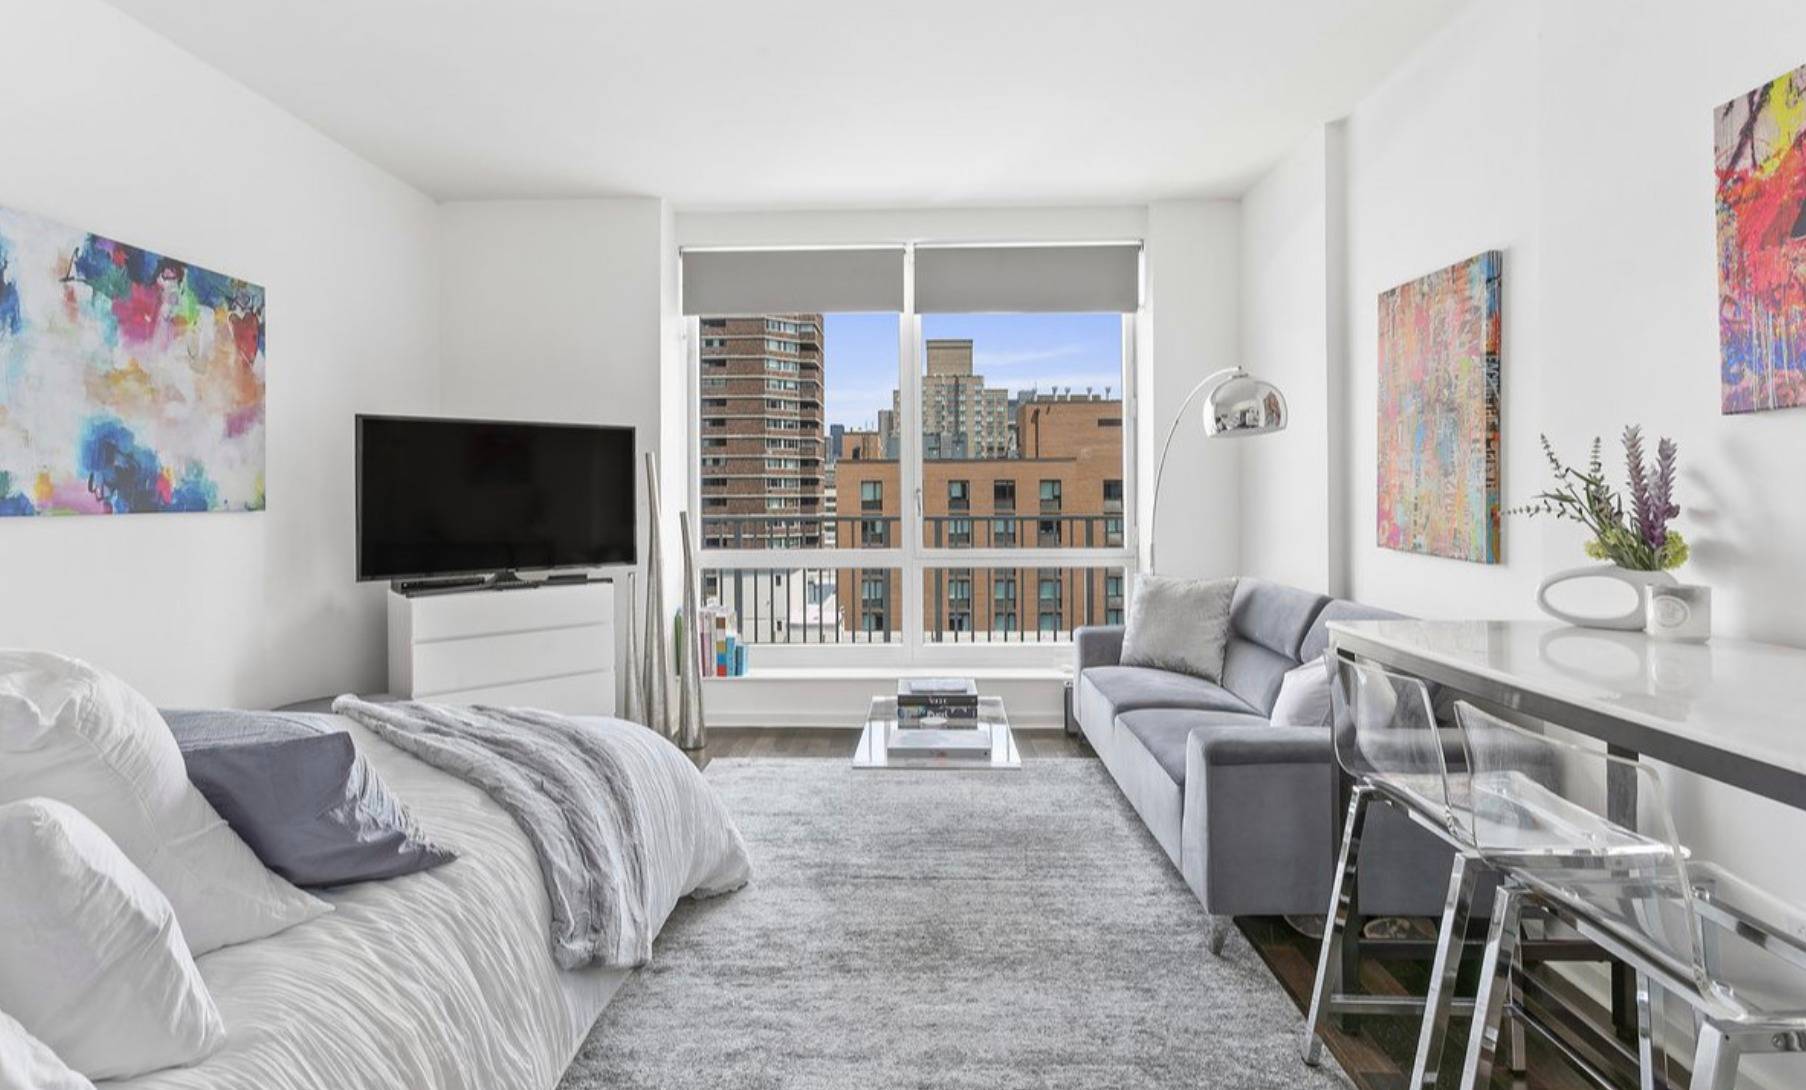 In triple mint condition, stunning studio designed by famous designer and architect, Philippe Starck features floor to ceiling windows with EMPIRE STATE VIEWS !